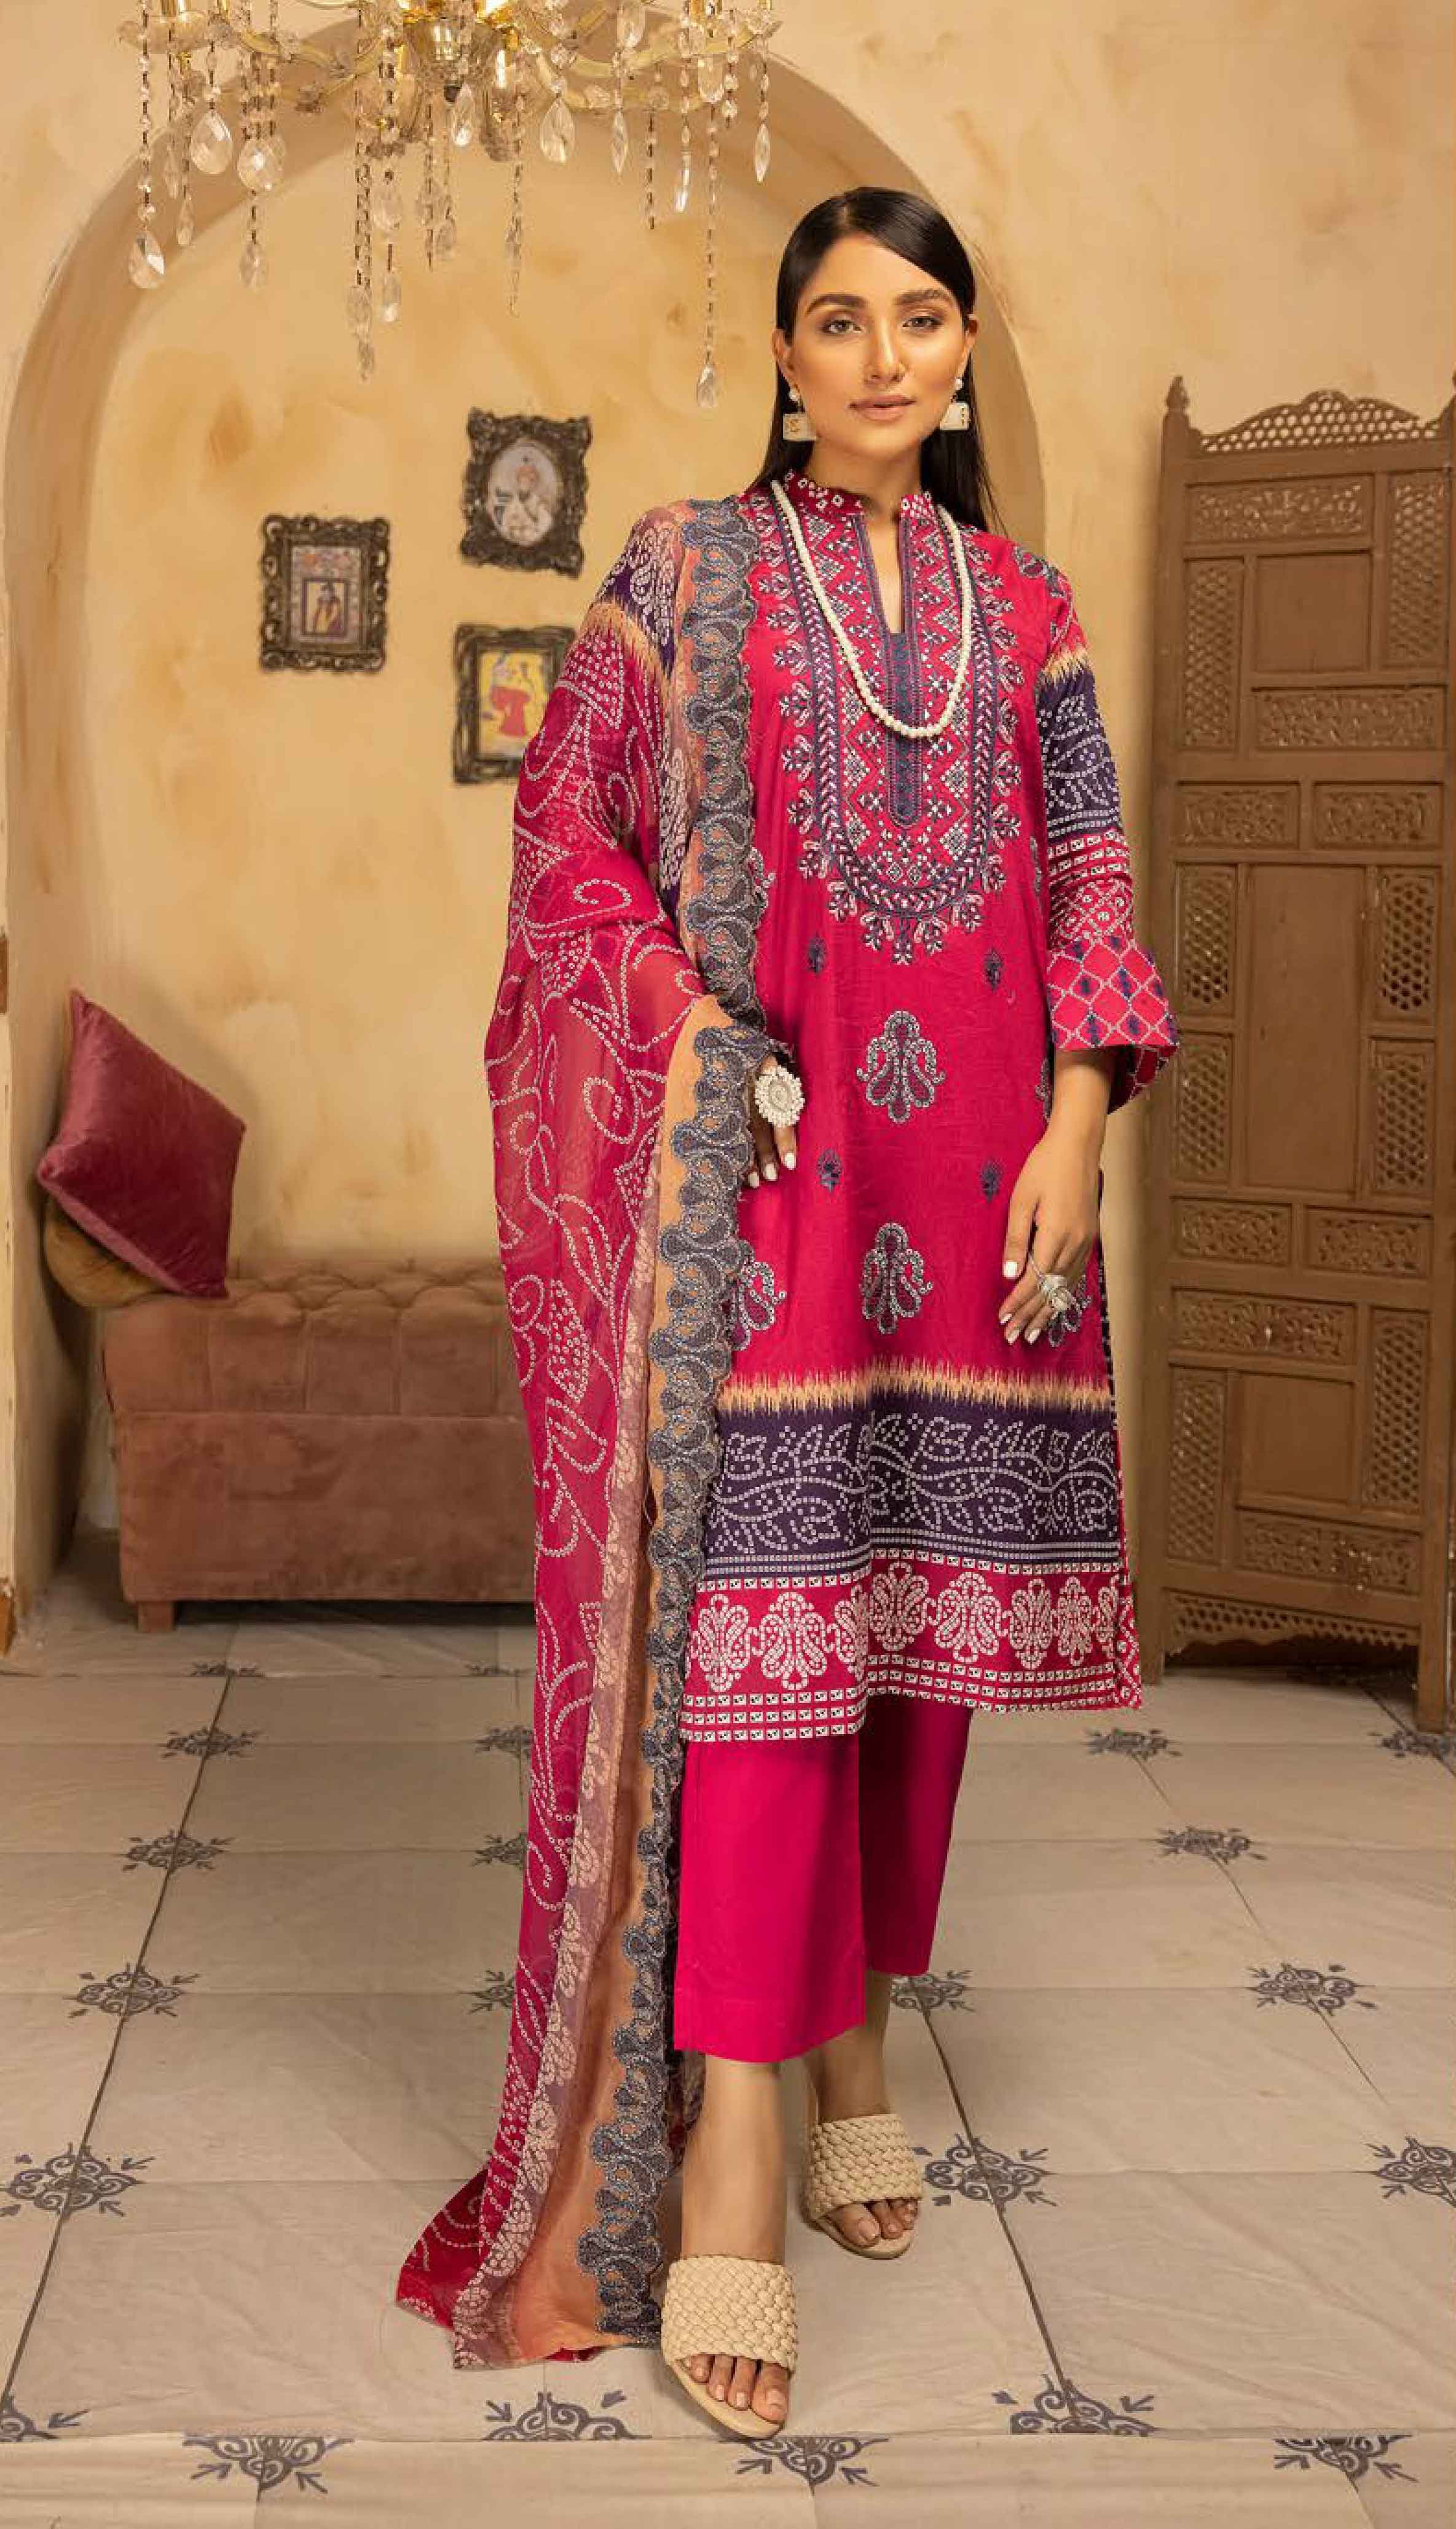 Heena by Simrans Readymade 3 Piece Lawn Outfit Pink DesiP 